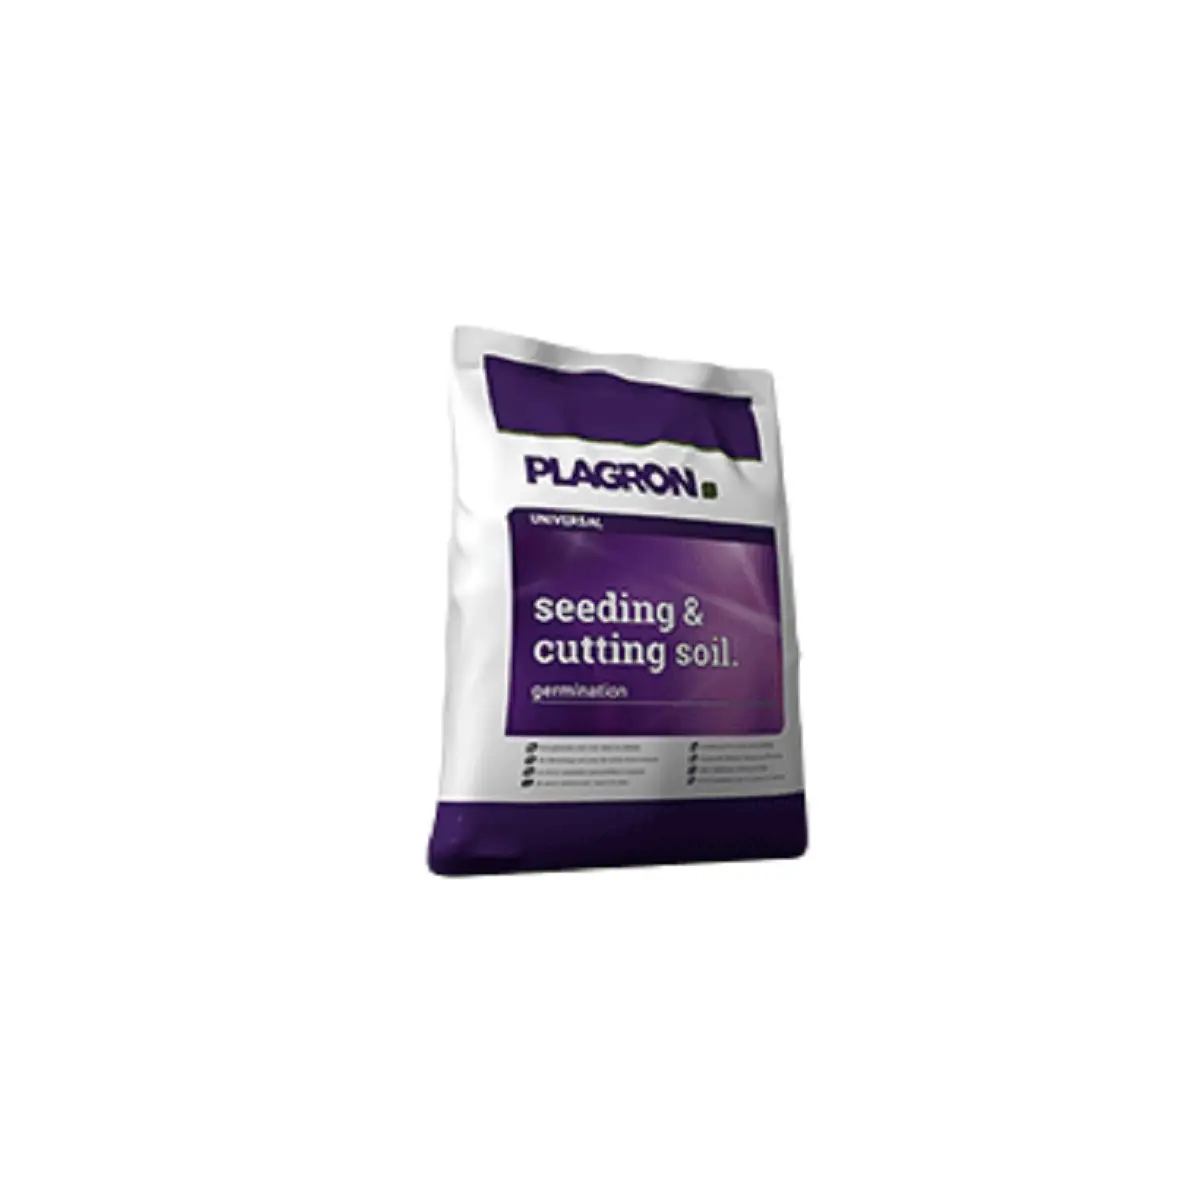 Plagron Seeding and cutting soil 25 Litres